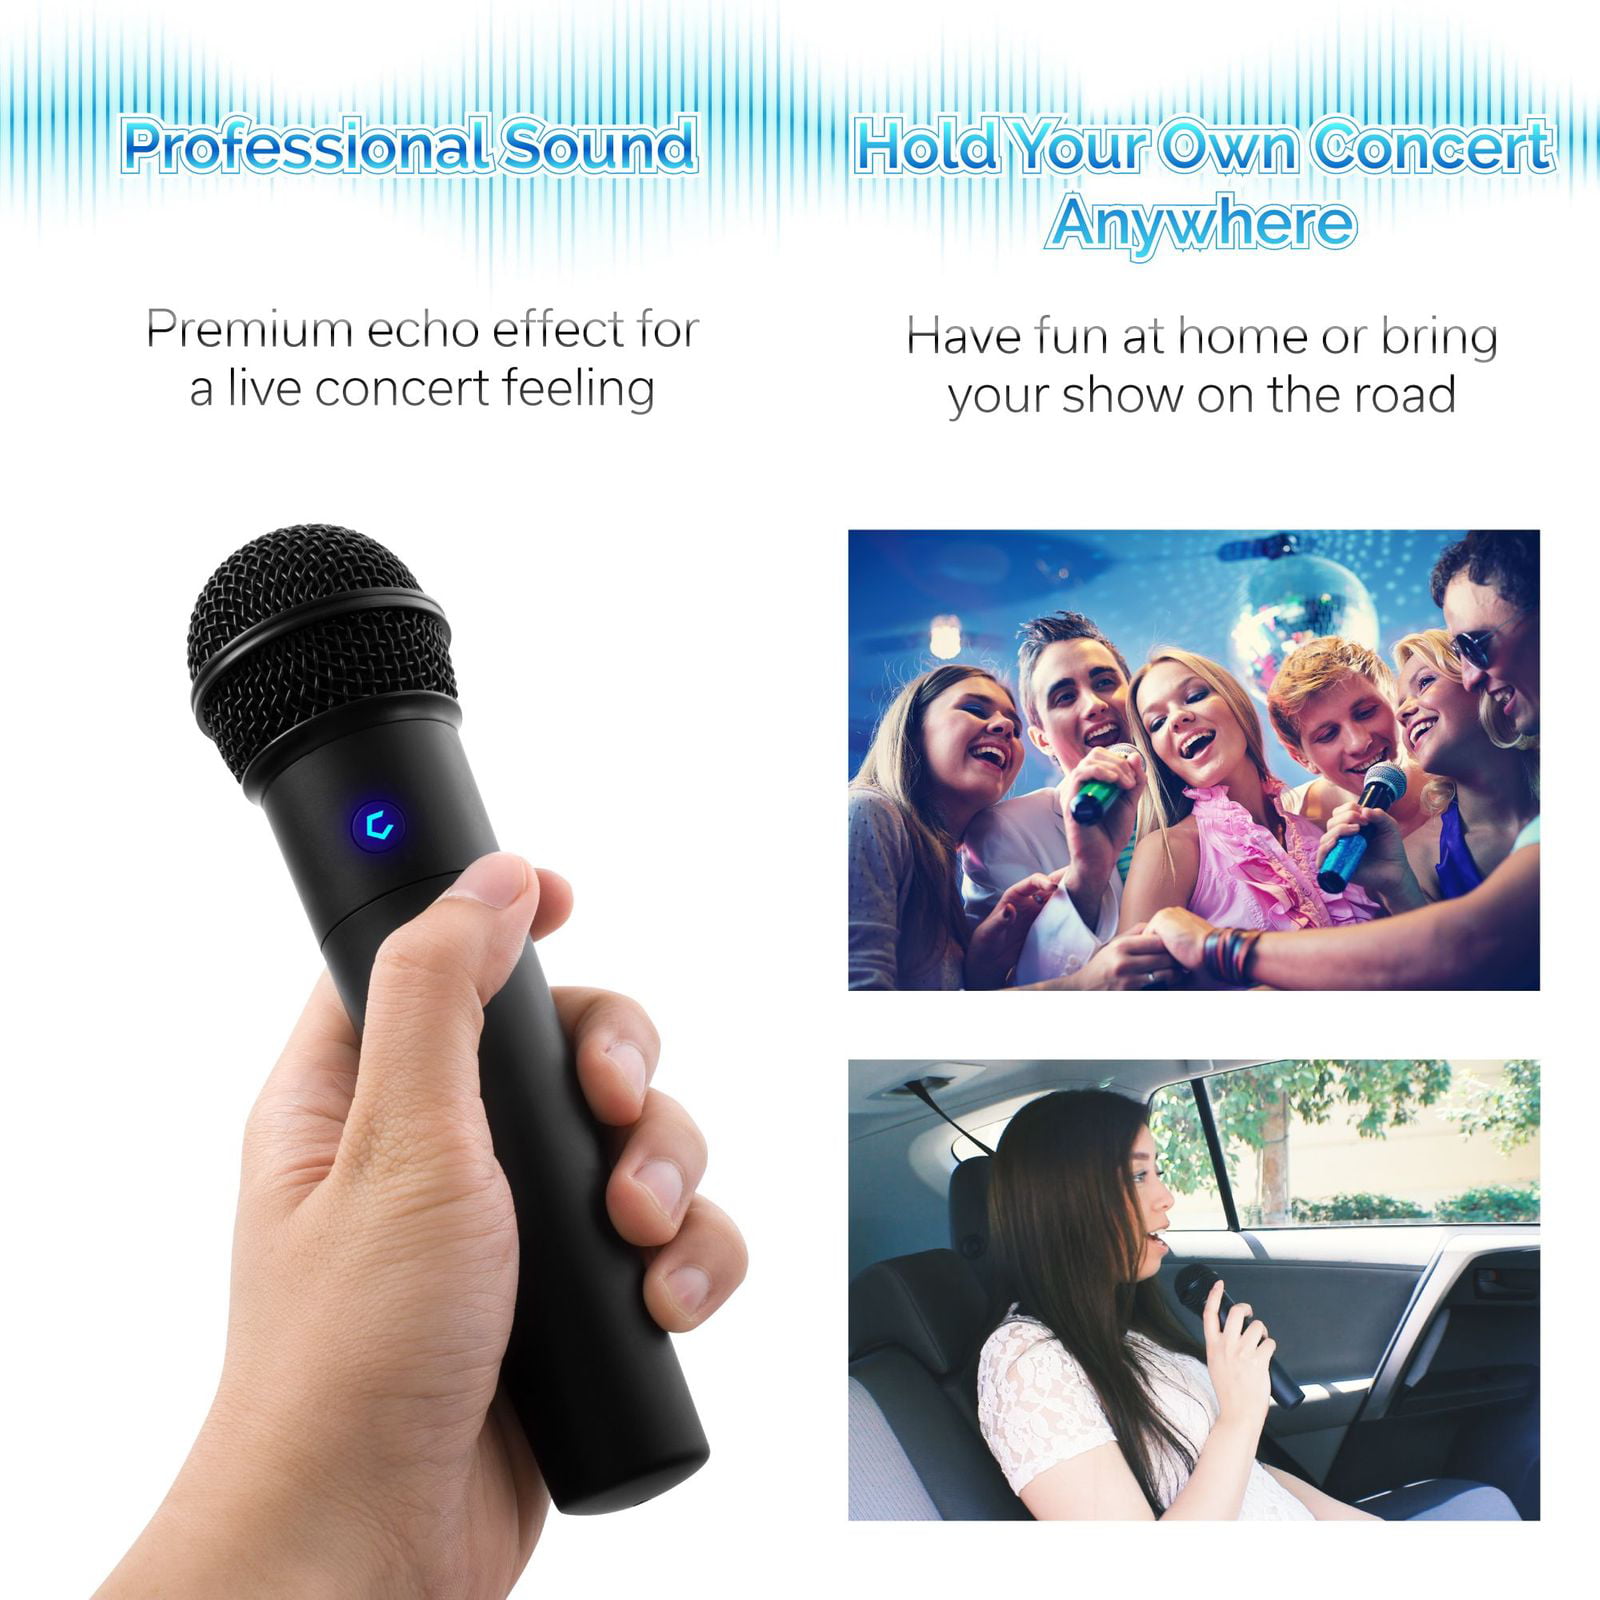 New Model BT Speaker Karaoke Machine Choose Unlimited Music Source from YouTube for iPhone iPad Smartphone Tablet Cobble Pro Wireless Karaoke Microphone 2-pack Mic Source Vocal Removal Technology